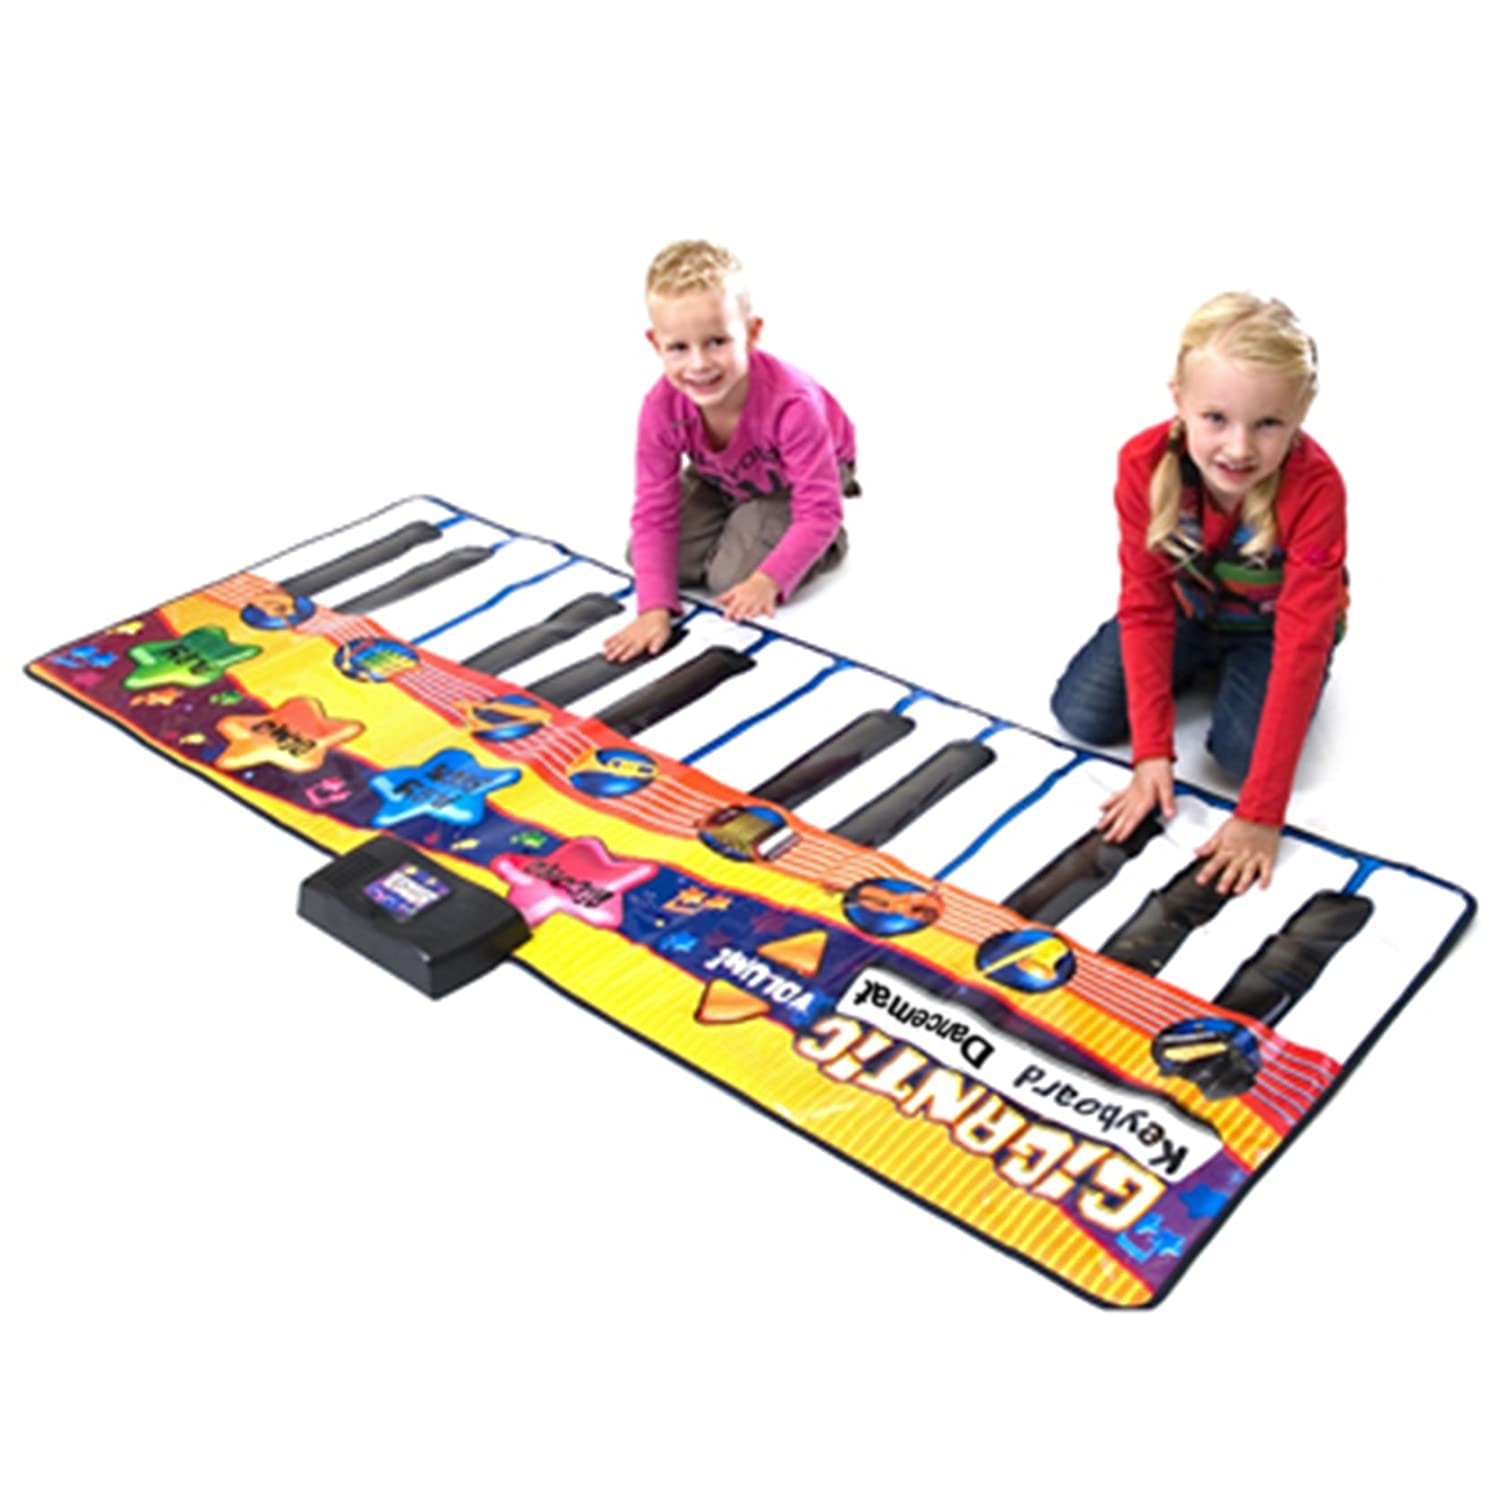 Top 10 Best Piano for Toddlers Reviews in 2022 9